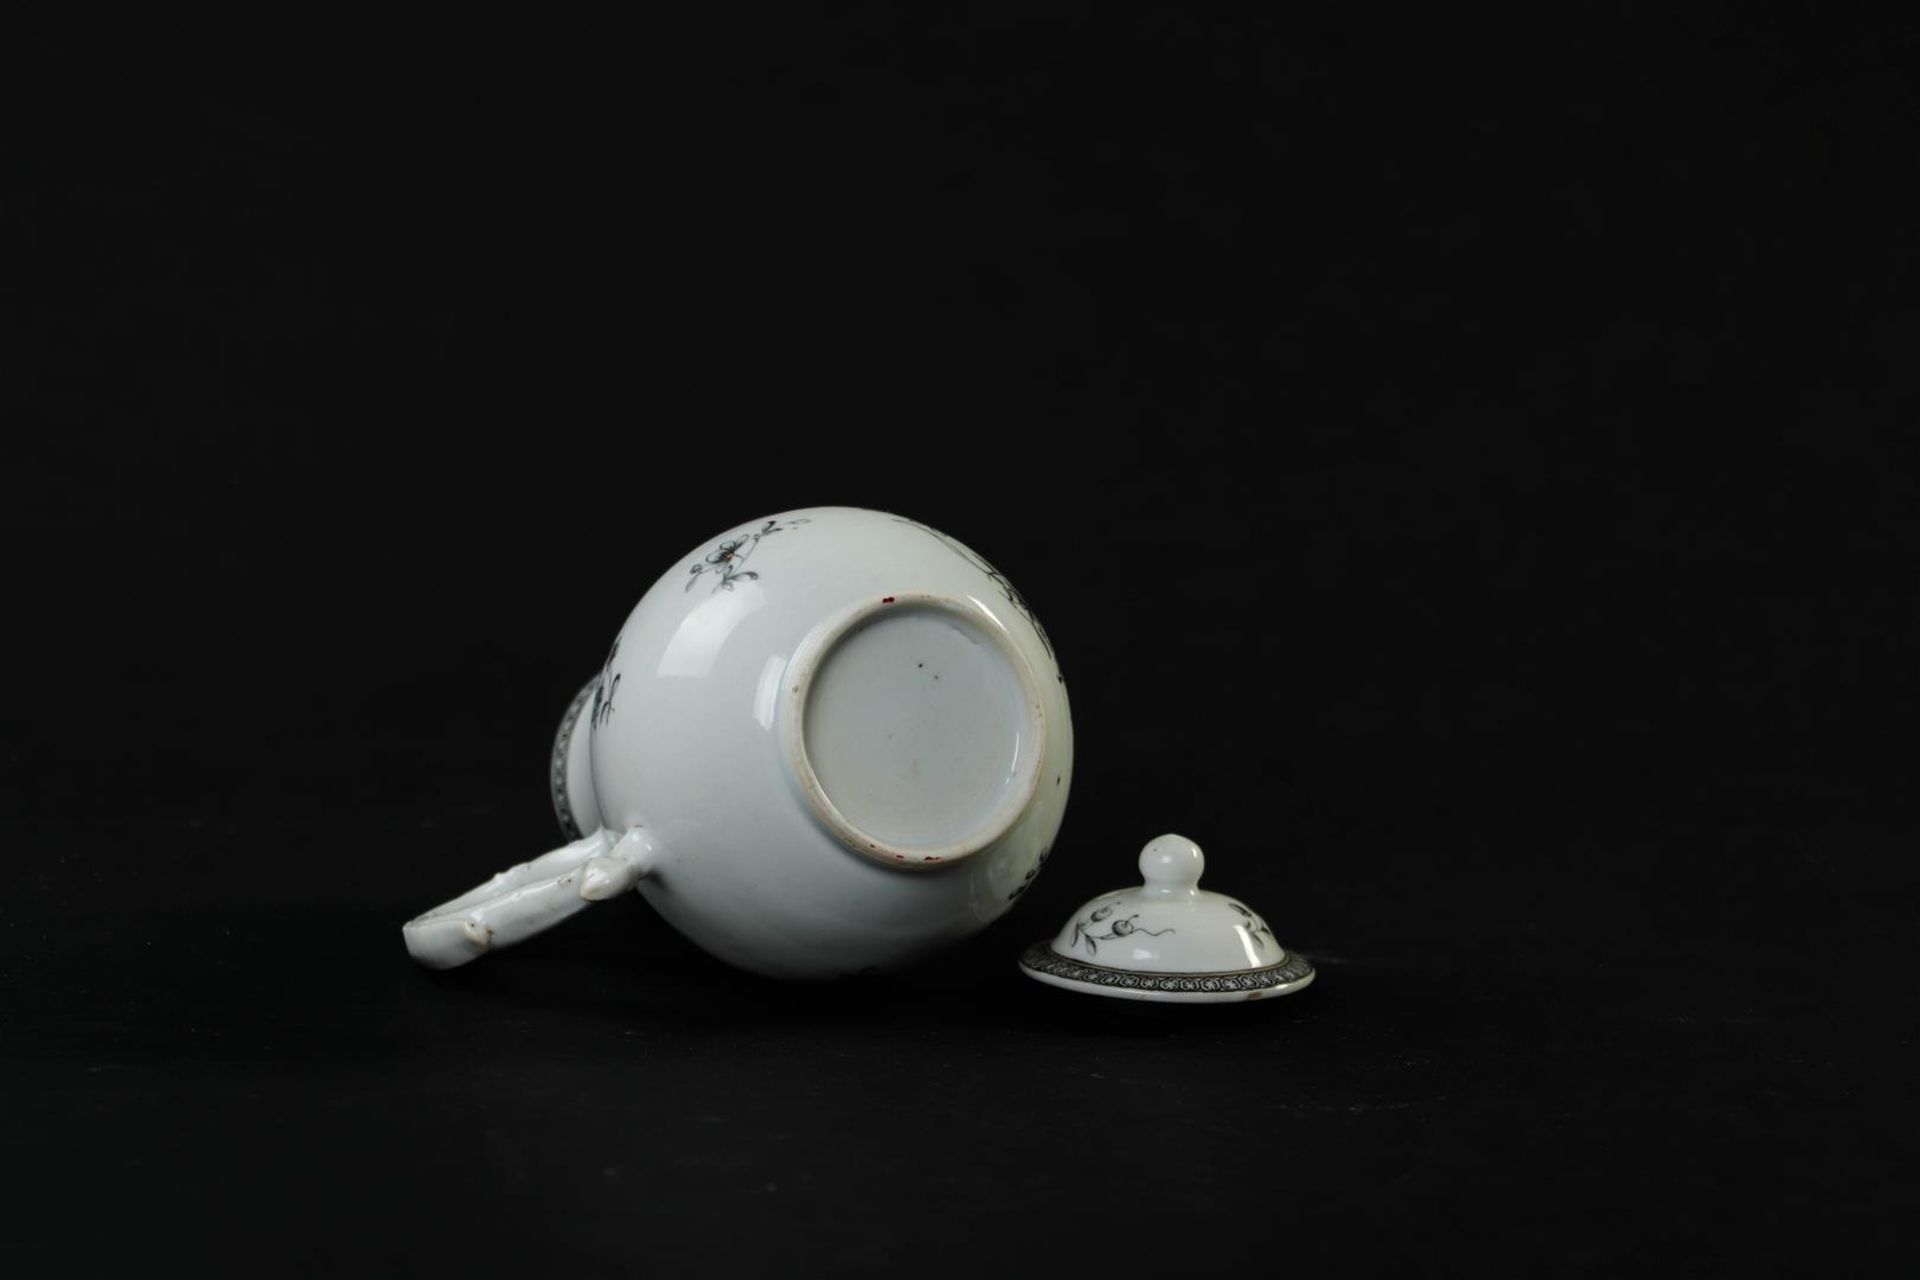 An Encre de Chine tableware set consisting of a teapot, milk jug, tea caddy, patty pan and spoon tra - Image 15 of 24